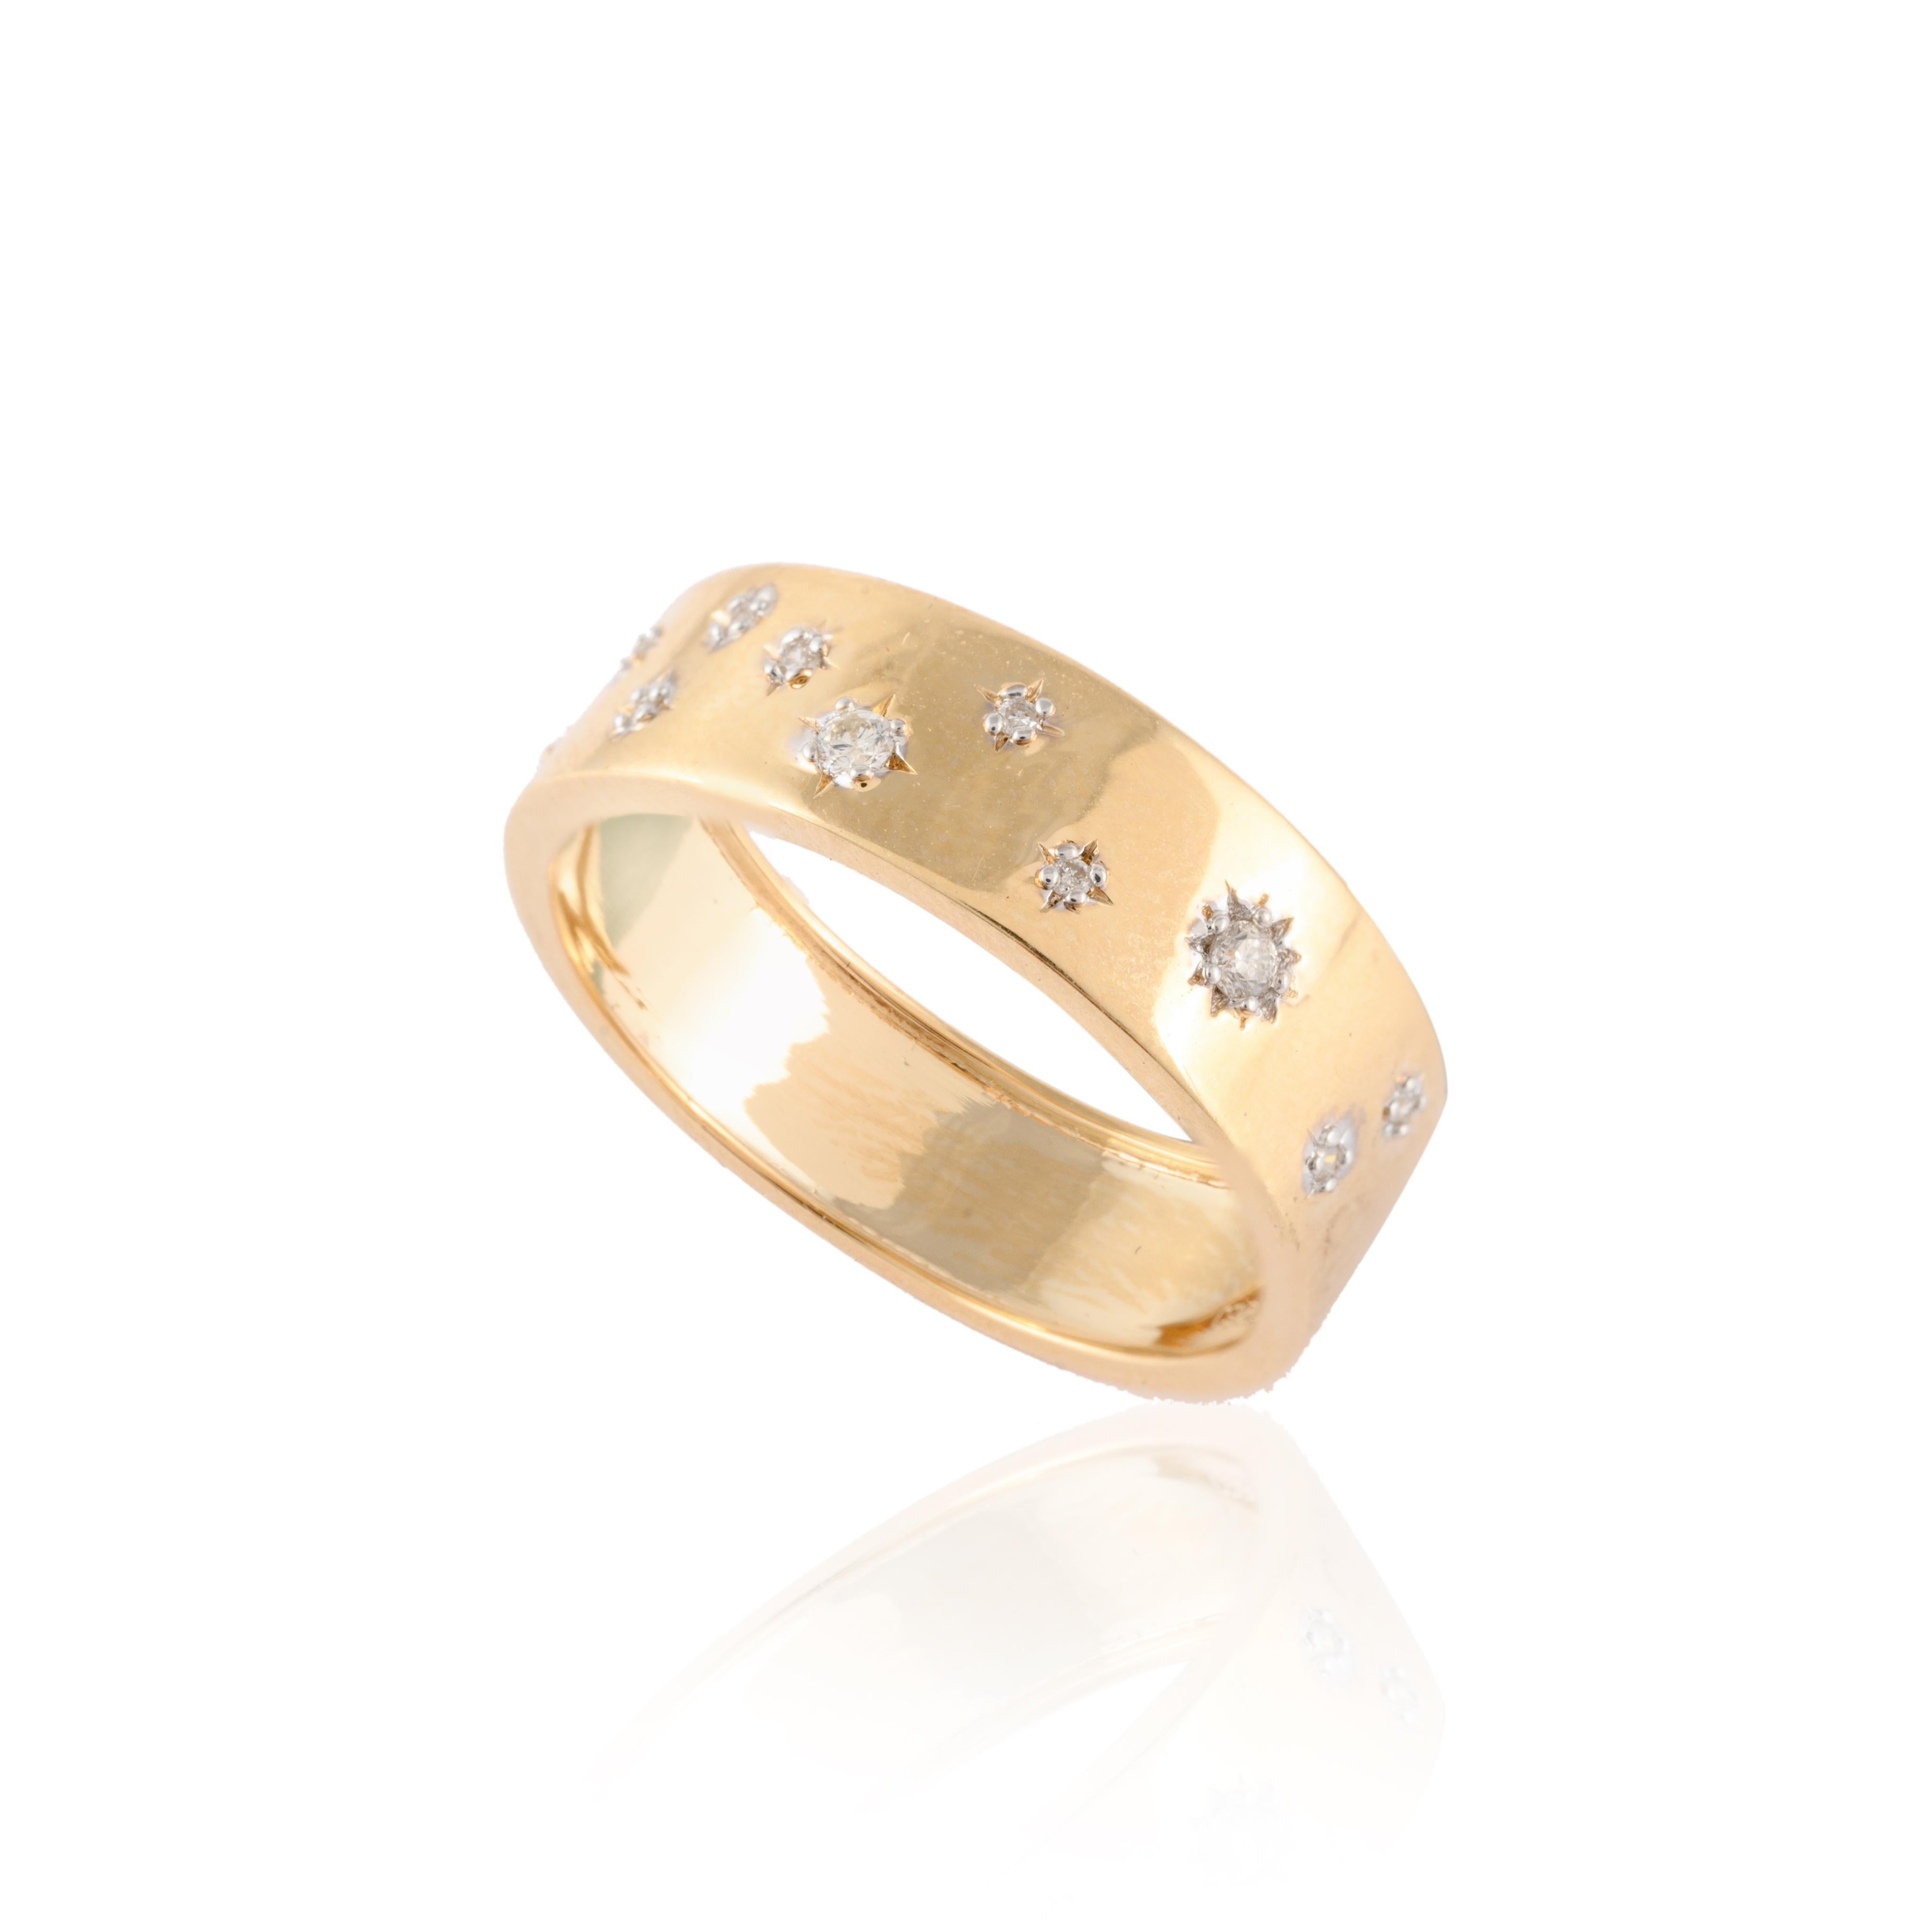 For Sale:  Genuine Diamond Stardust Unisex Band Ring in 18k Solid Yellow Gold 5